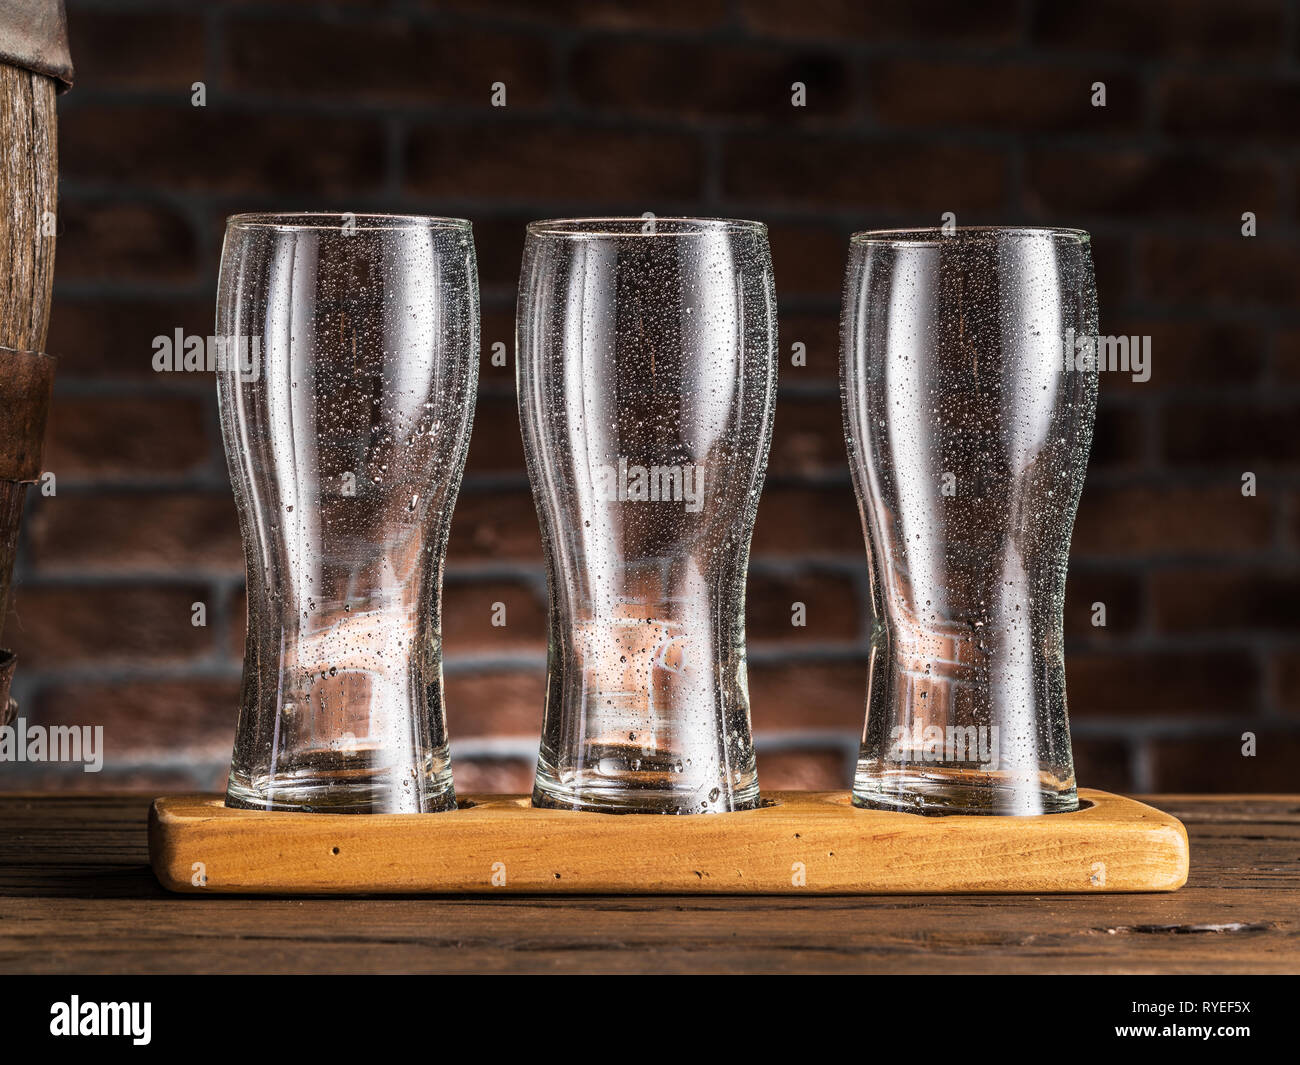 https://c8.alamy.com/comp/RYEF5X/empty-beer-glasses-near-a-cask-on-wooden-table-craft-brewery-RYEF5X.jpg